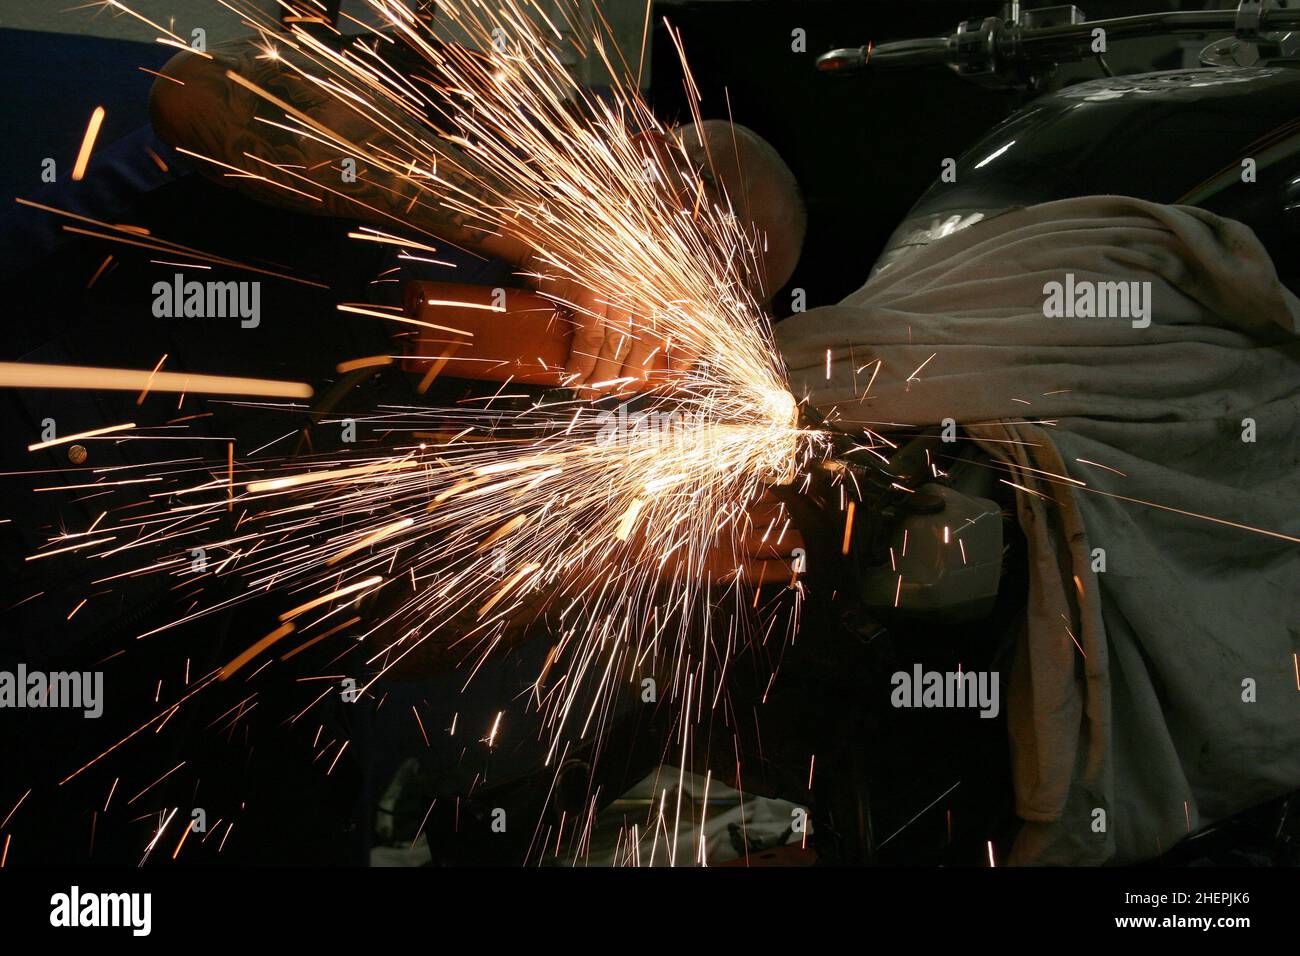 working with an angle grinder at a motorcycle, spraying sparks Stock Photo